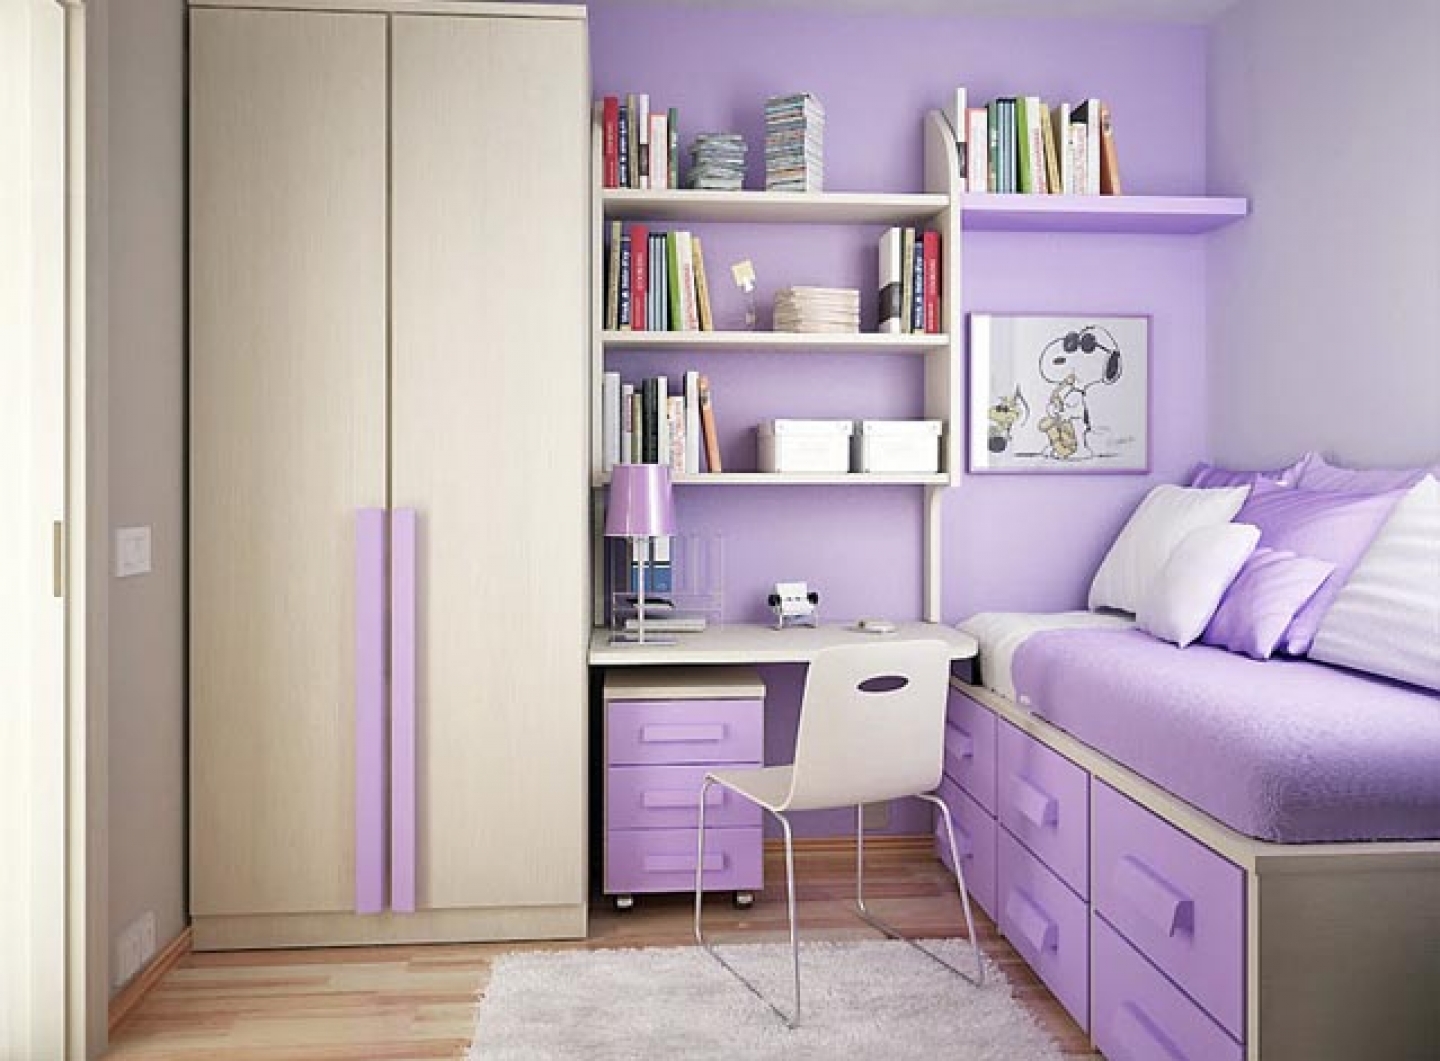 Ideas For Decorating Small Bedroom The Interior Designs